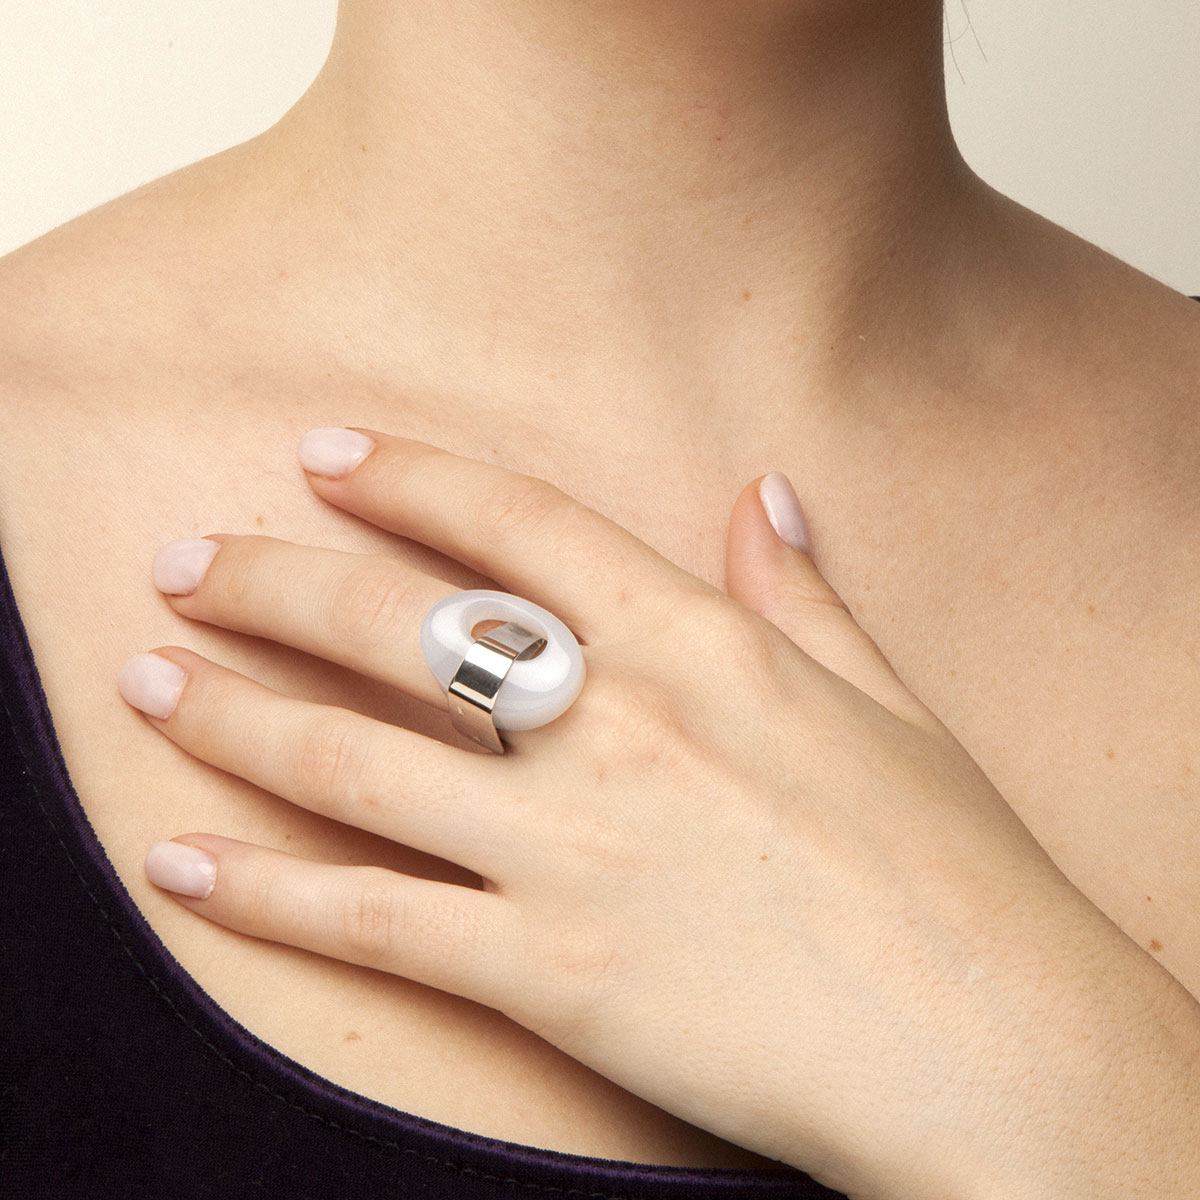 Tox handmade ring in sterling silver and blue chalcedony designed by Belen Bajo m1